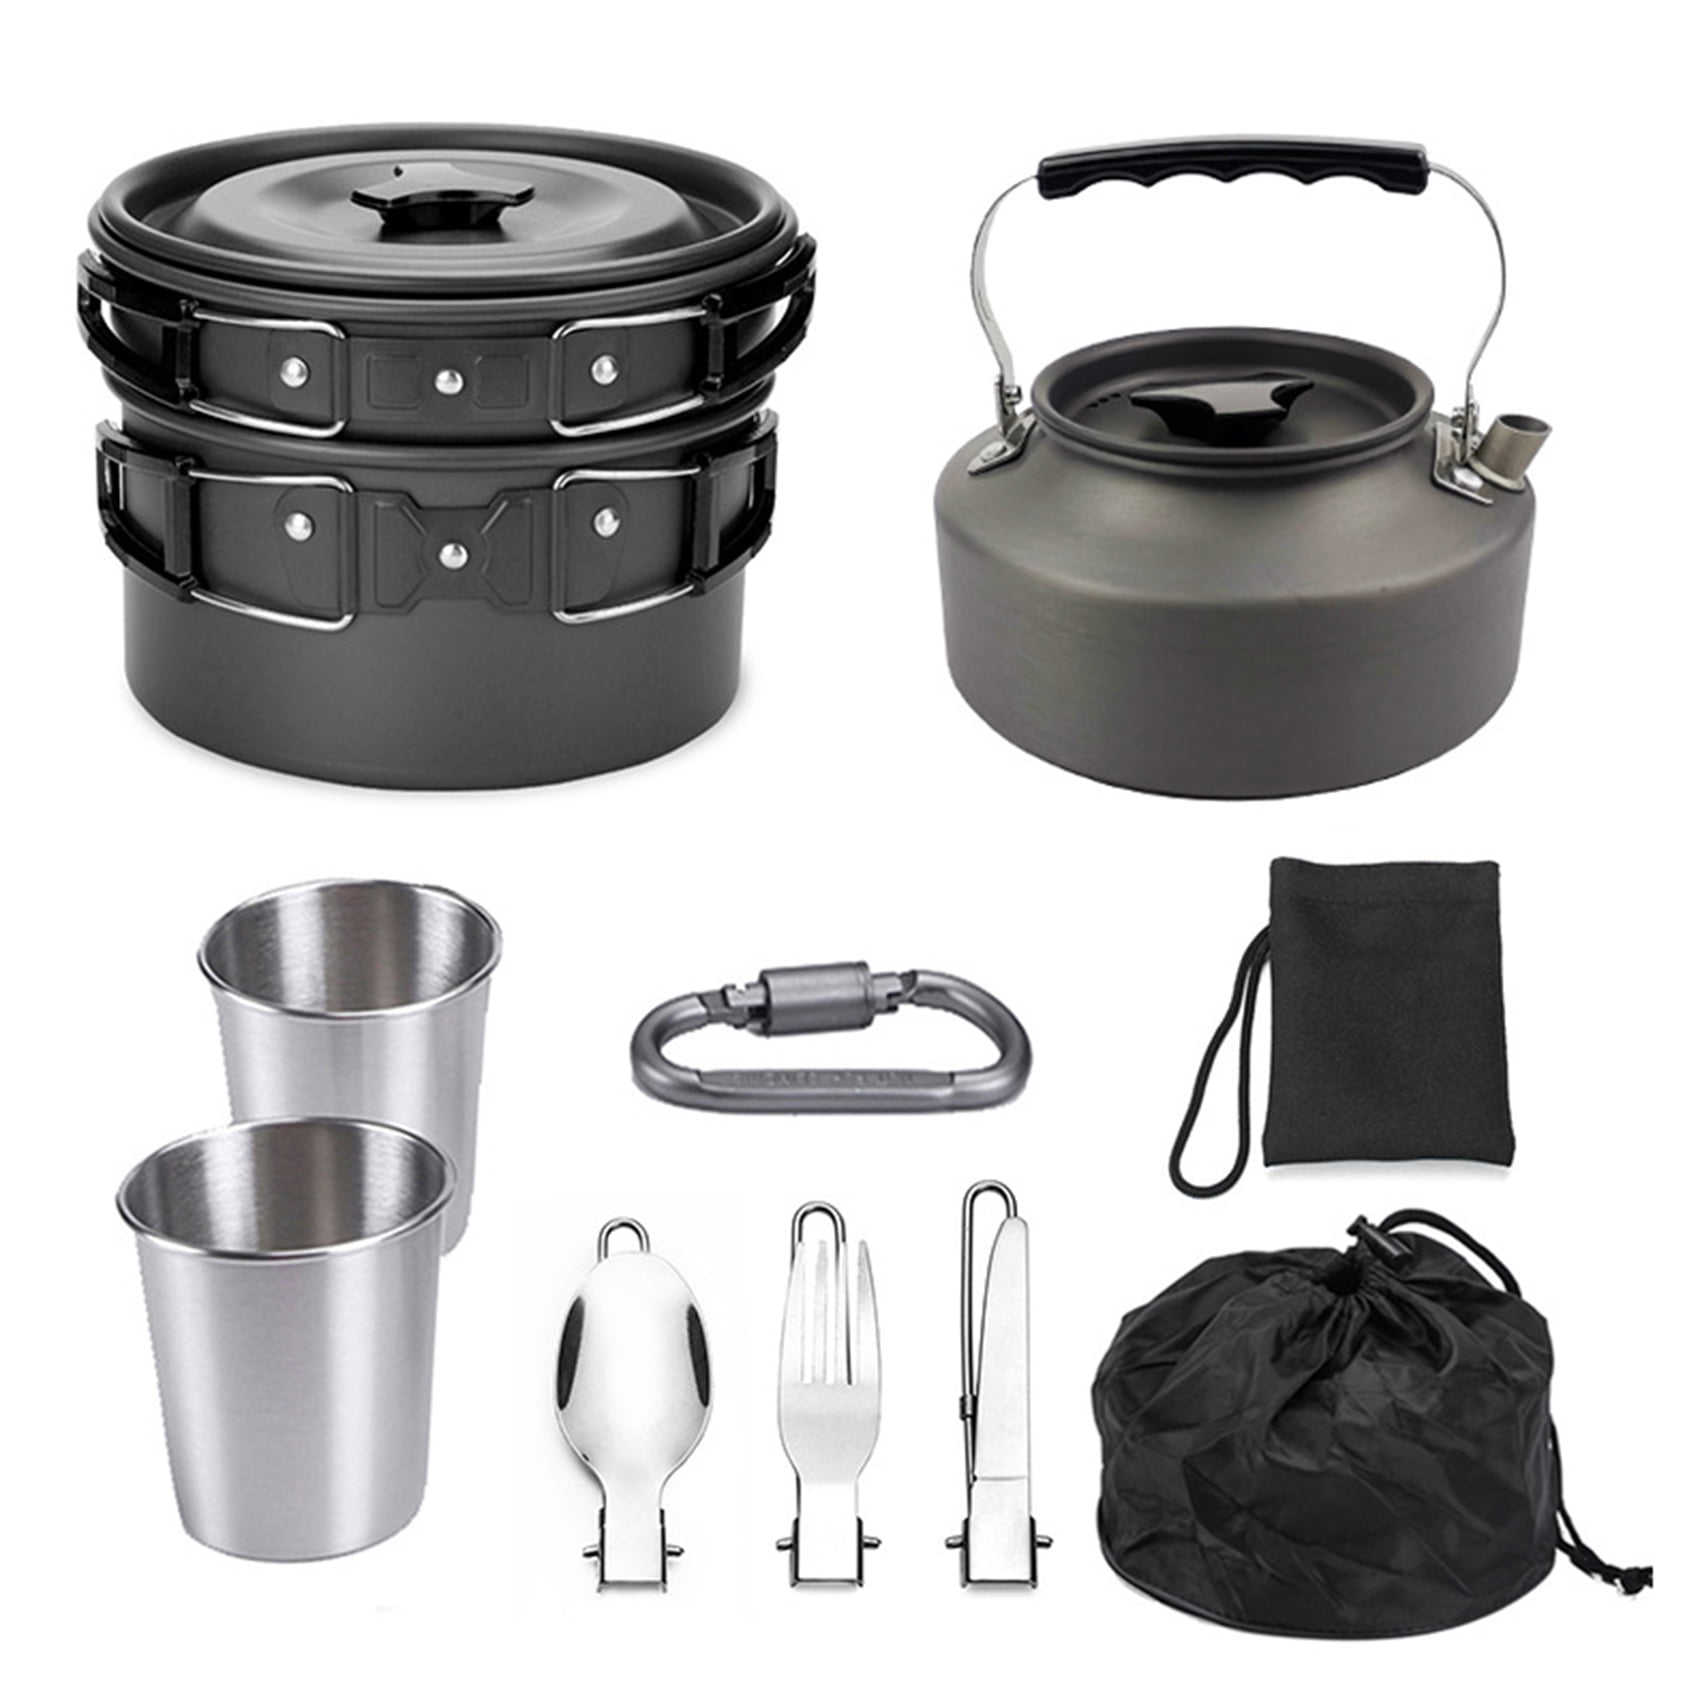 Details about   1 Set Camping Cookware Mess Kits Portable Cookware Outdoor BBQ Cook Pots Hiking 